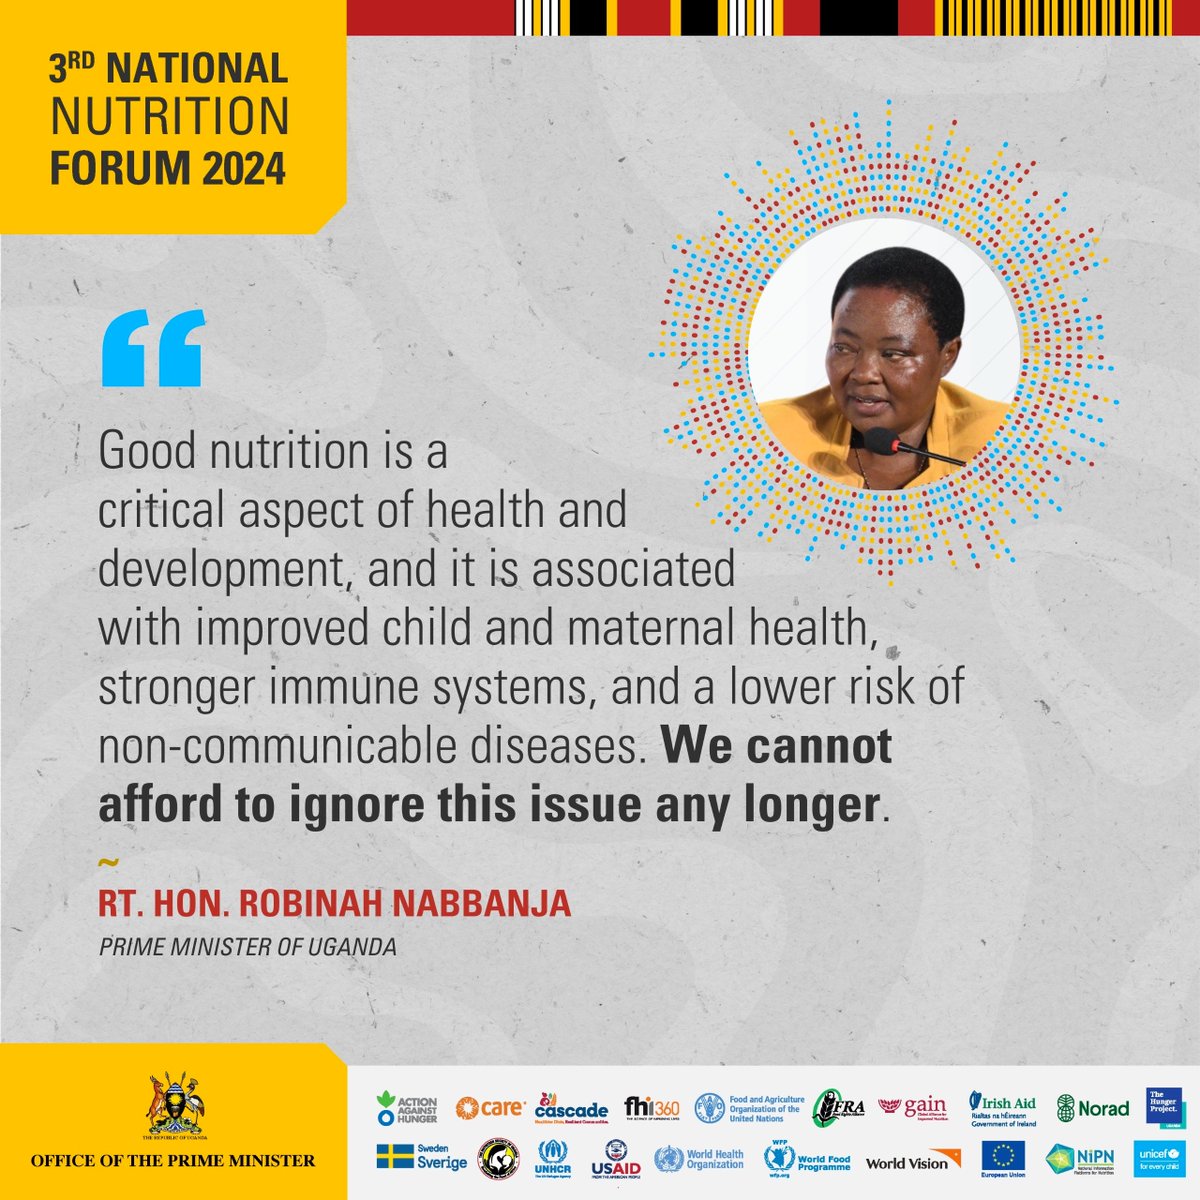 ''Good nutrition is a critical aspect of health and development, and it is associated with improved child and maternal health, and stronger immune systems. We cannot afford to ignore this issue any longer,'' says the Prime Minister, @R_Nabbanja. #NationalNutritionForum2024